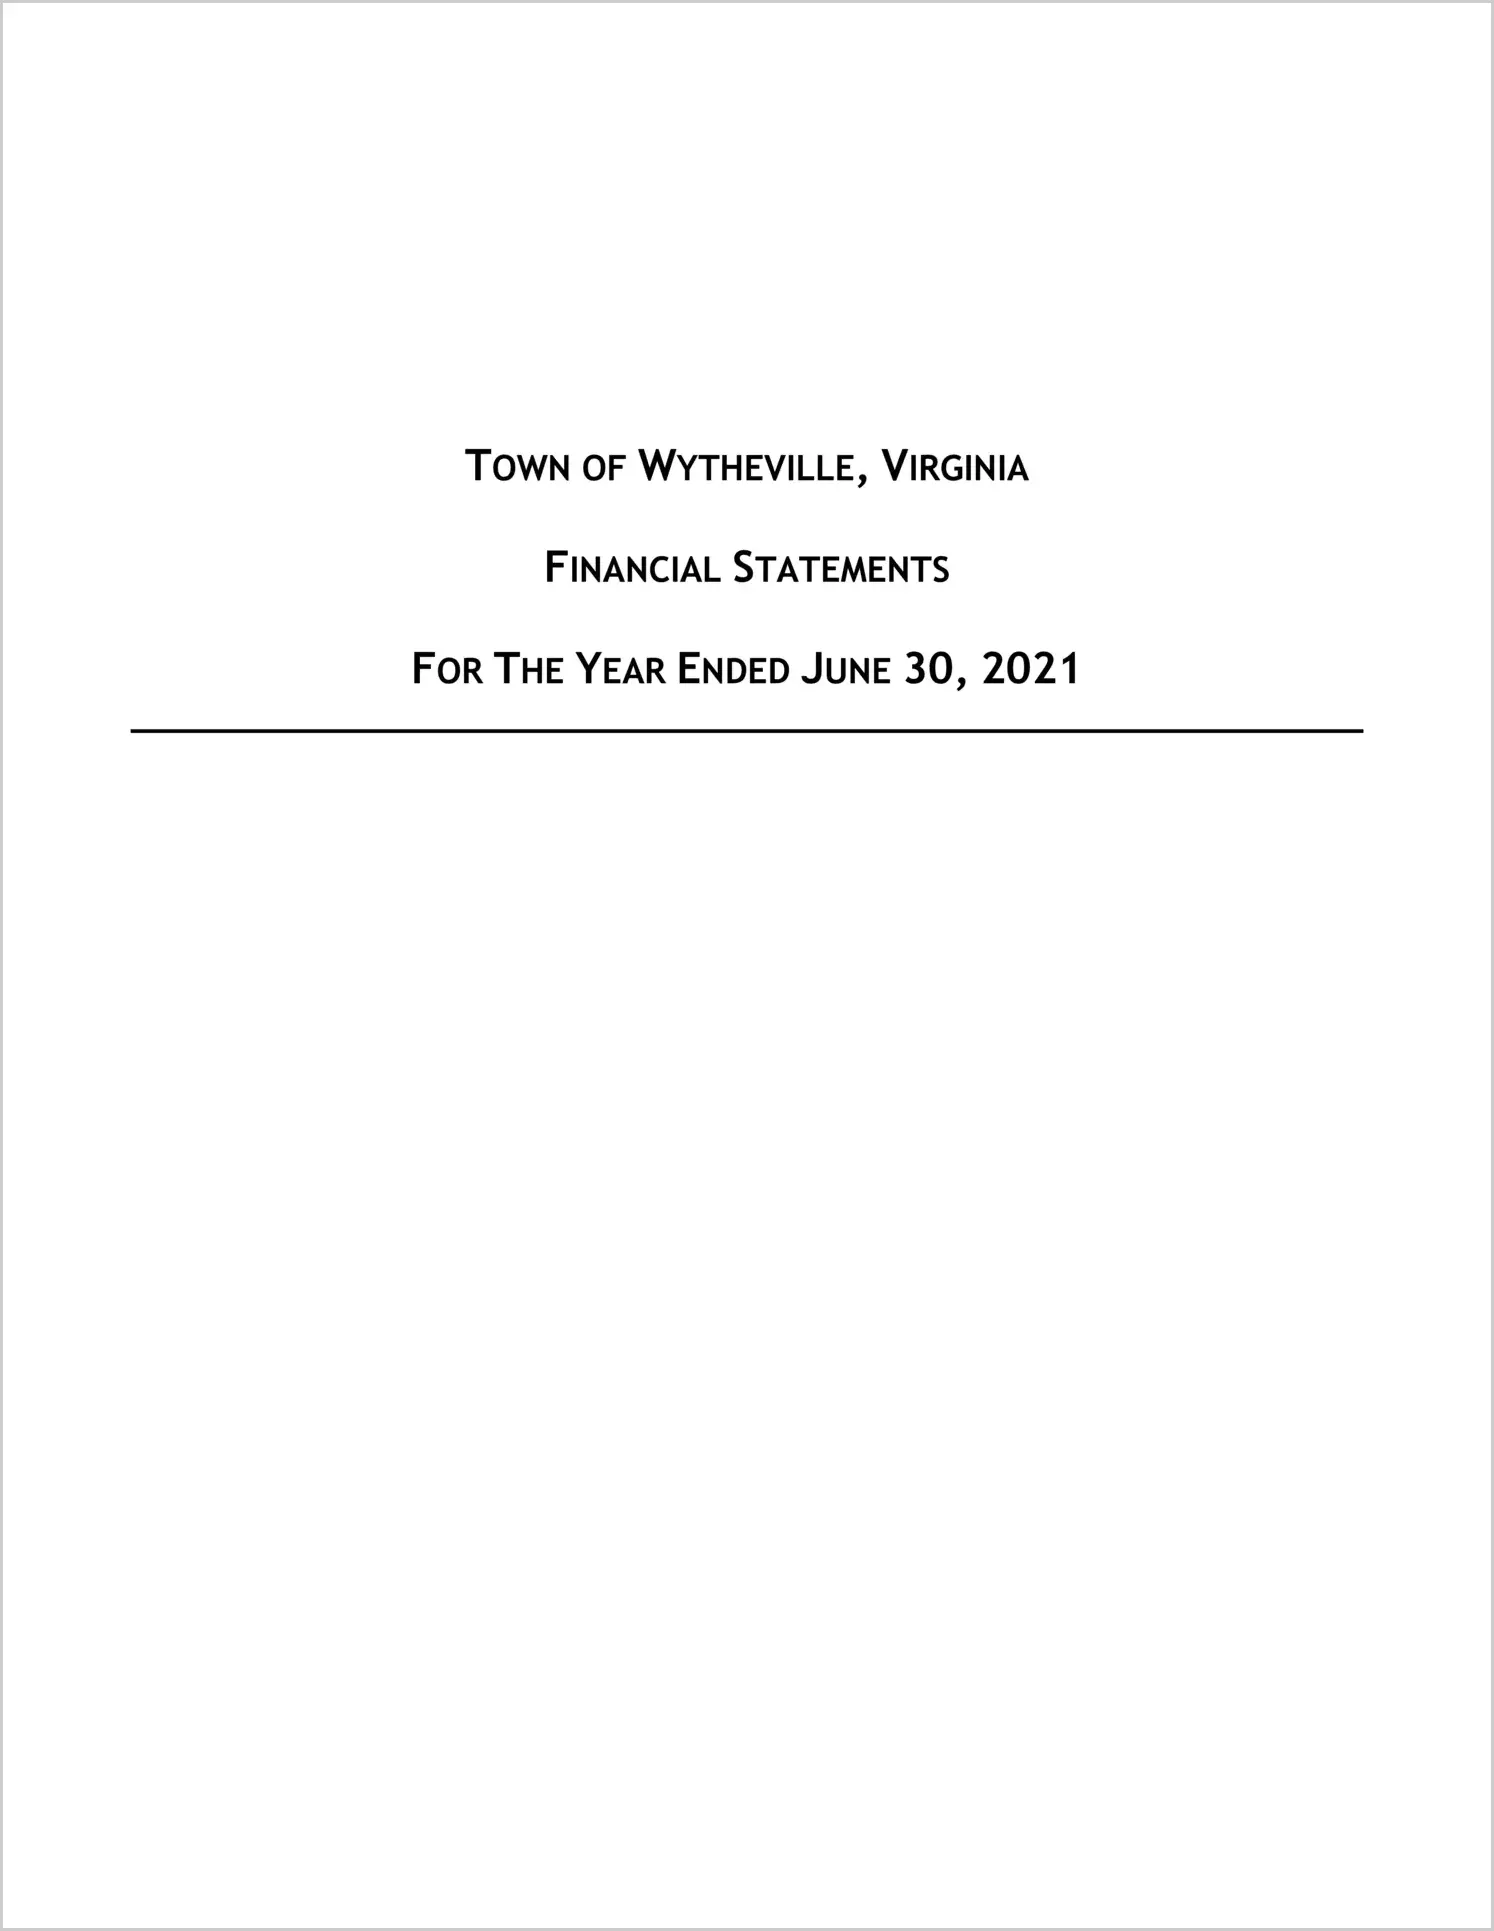 2021 Annual Financial Report for Town of Wytheville